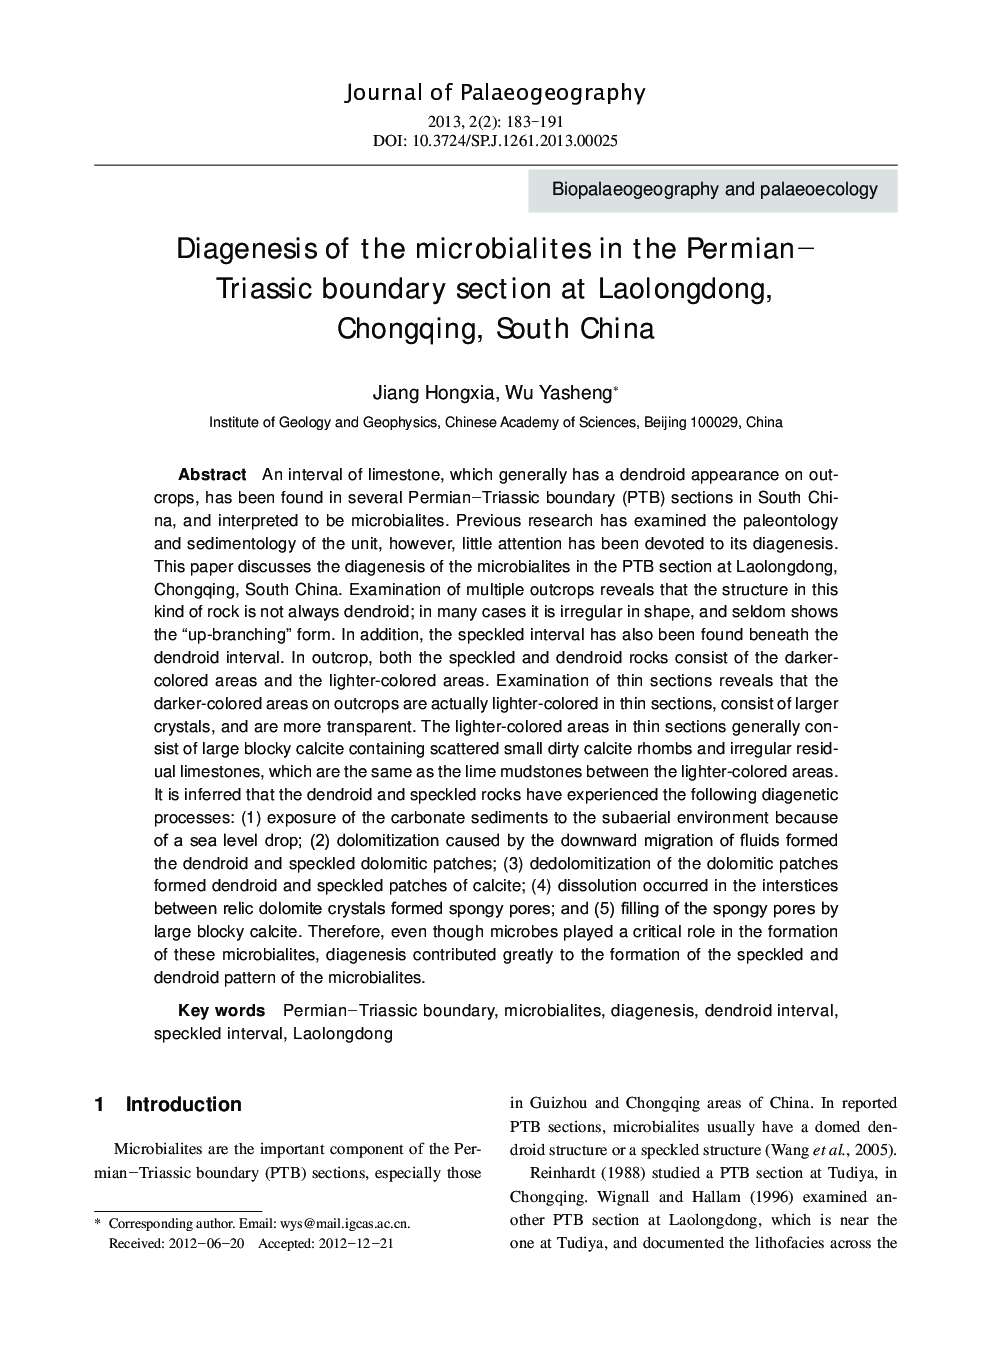 Diagenesis of the microbialites in the Permian–Triassic boundary section at Laolongdong, Chongqing, South China